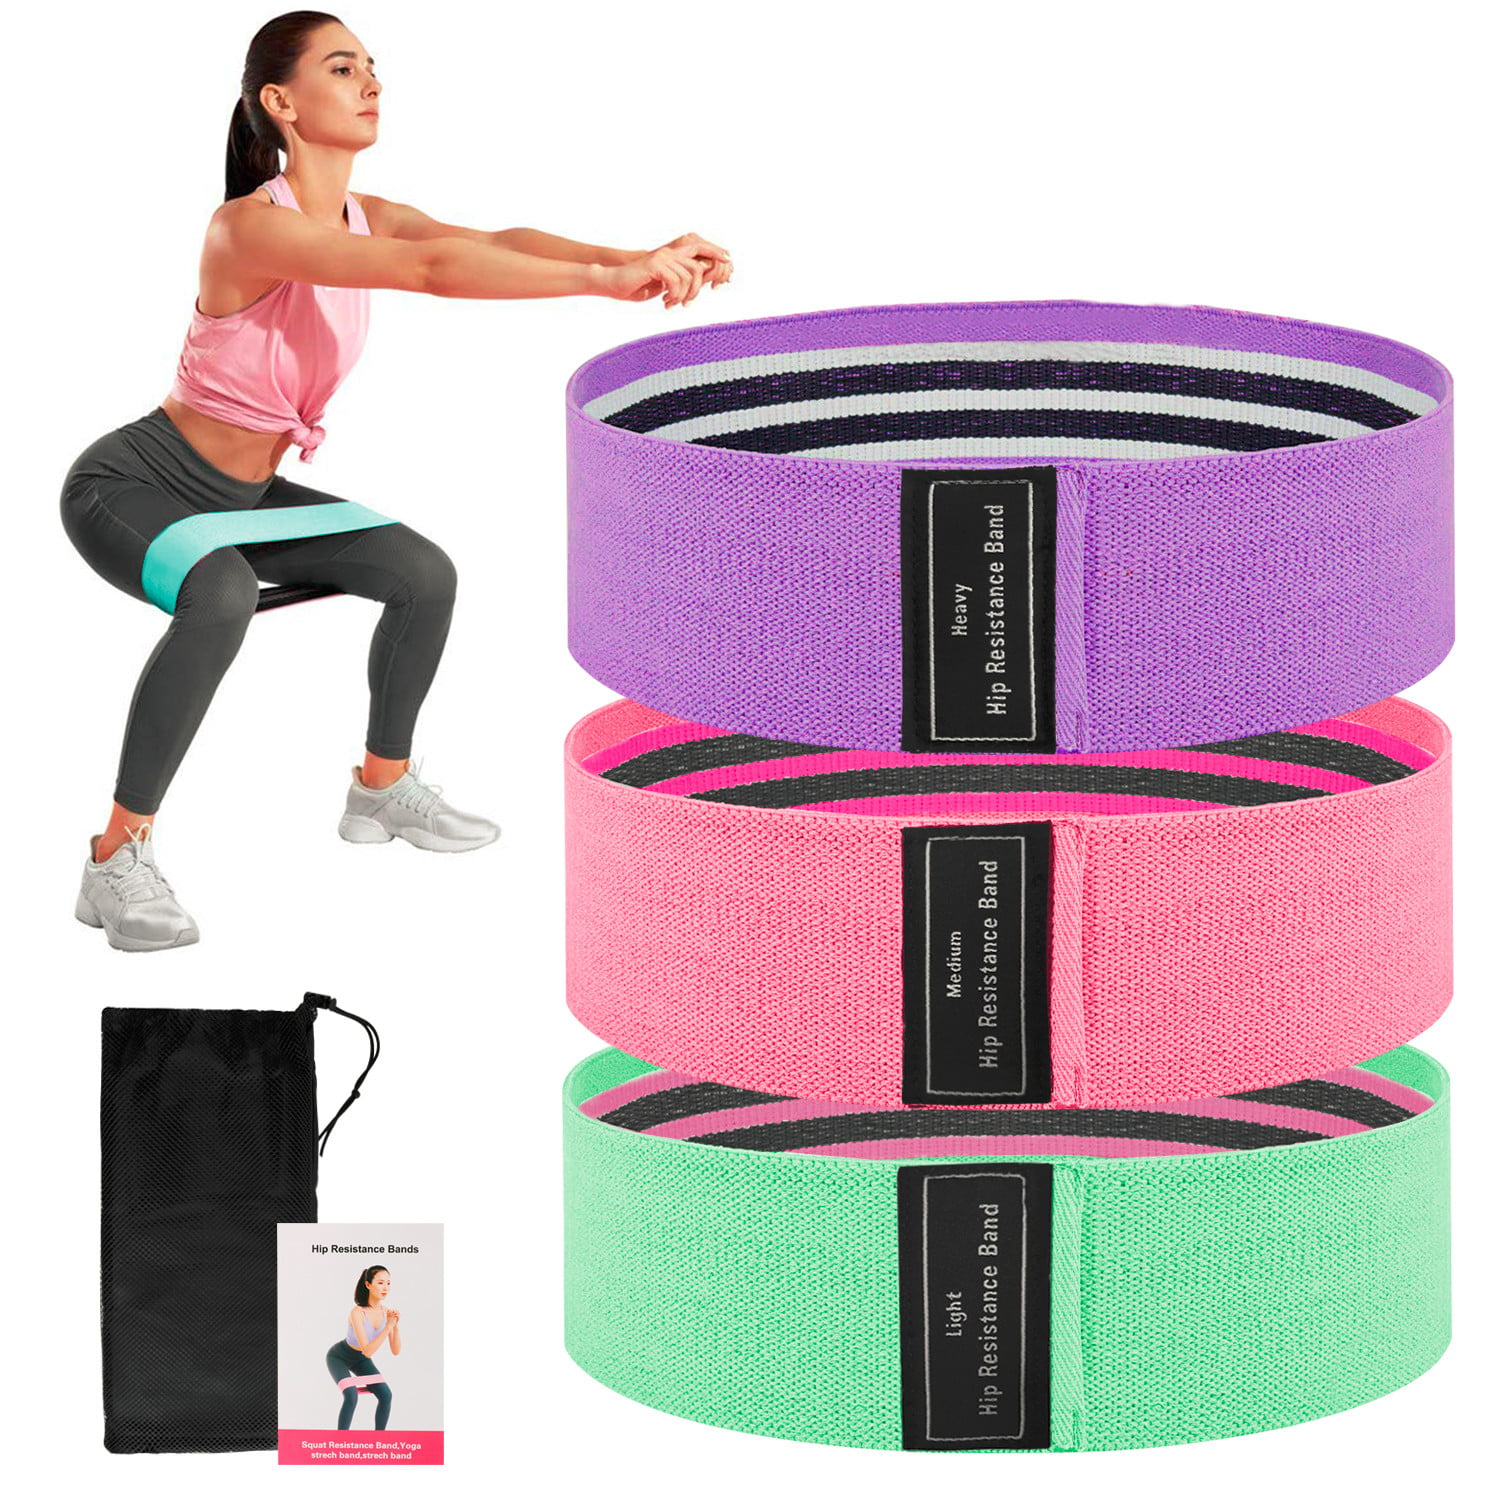 Fitness Equipment Workout Resistance Bands Elastic Band Hip Exercise Training